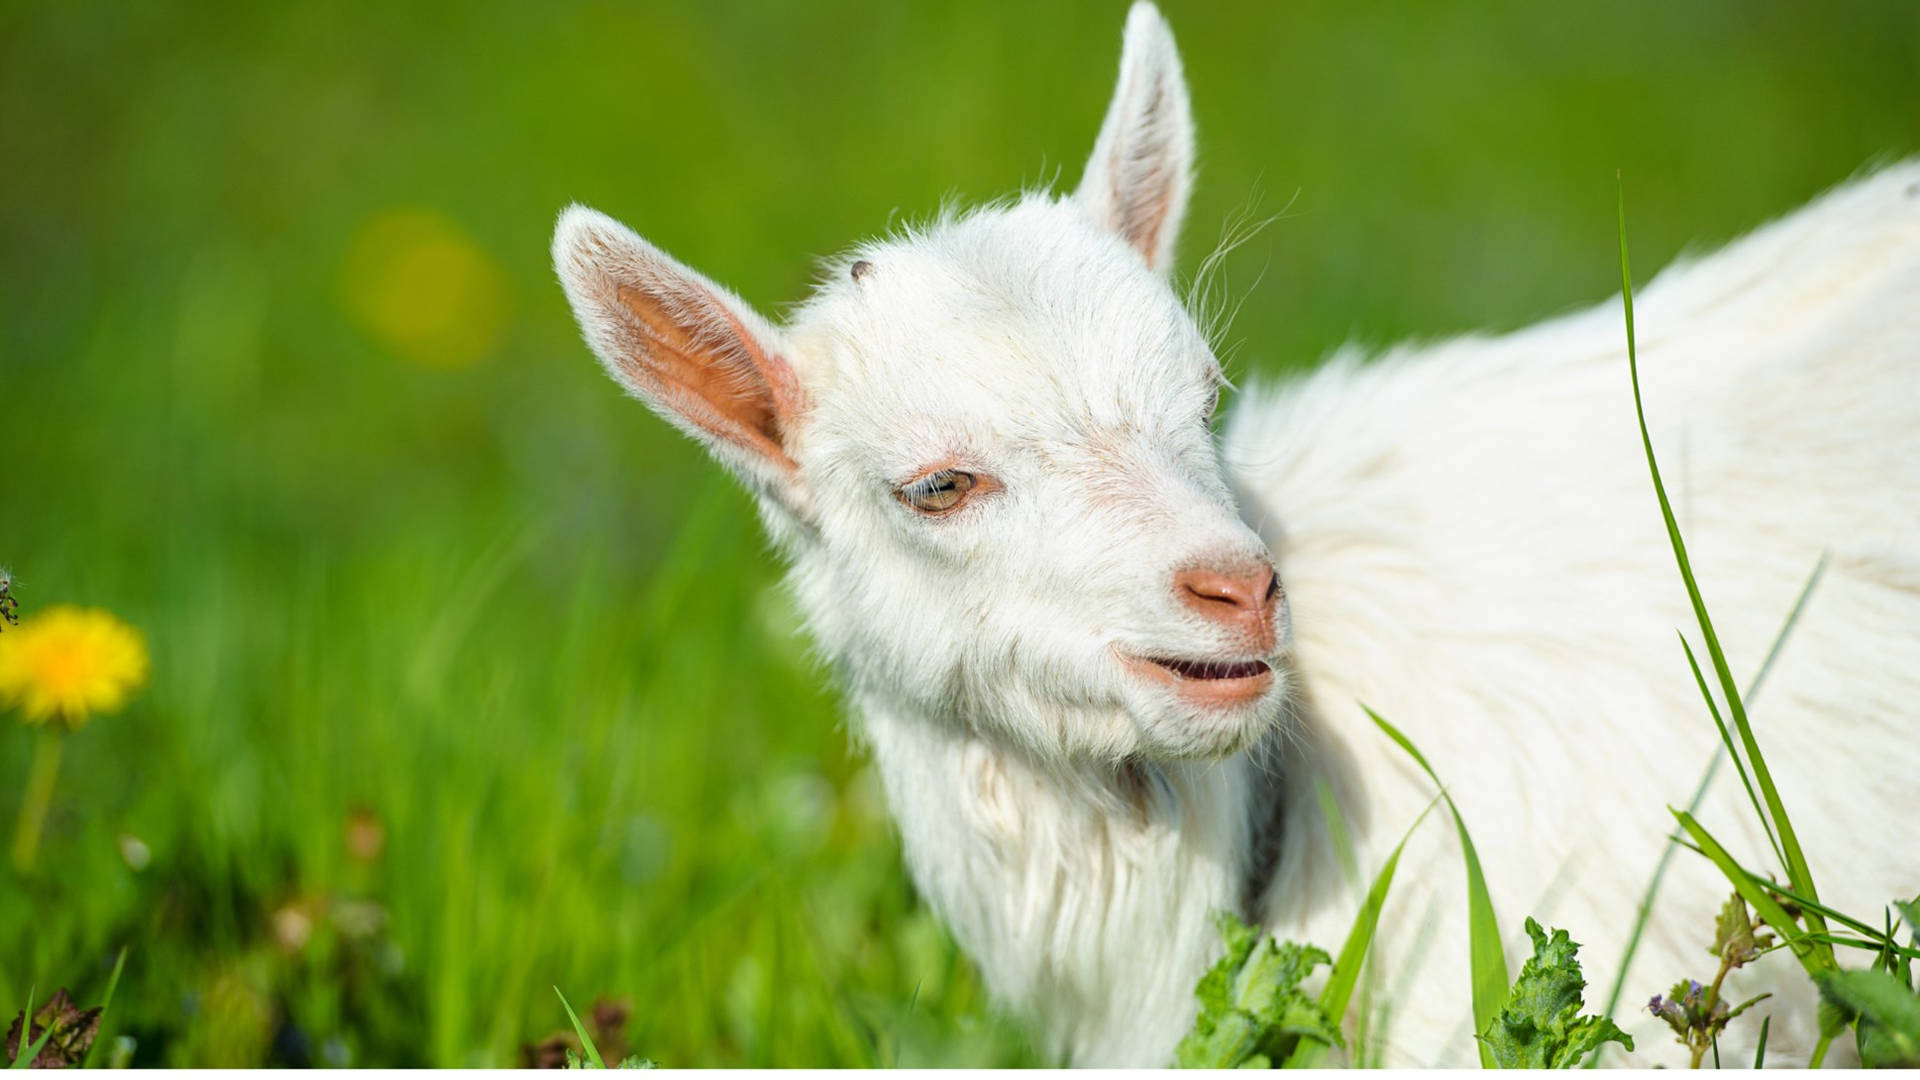 White Baby Goat In A Green Meadow Wallpaper